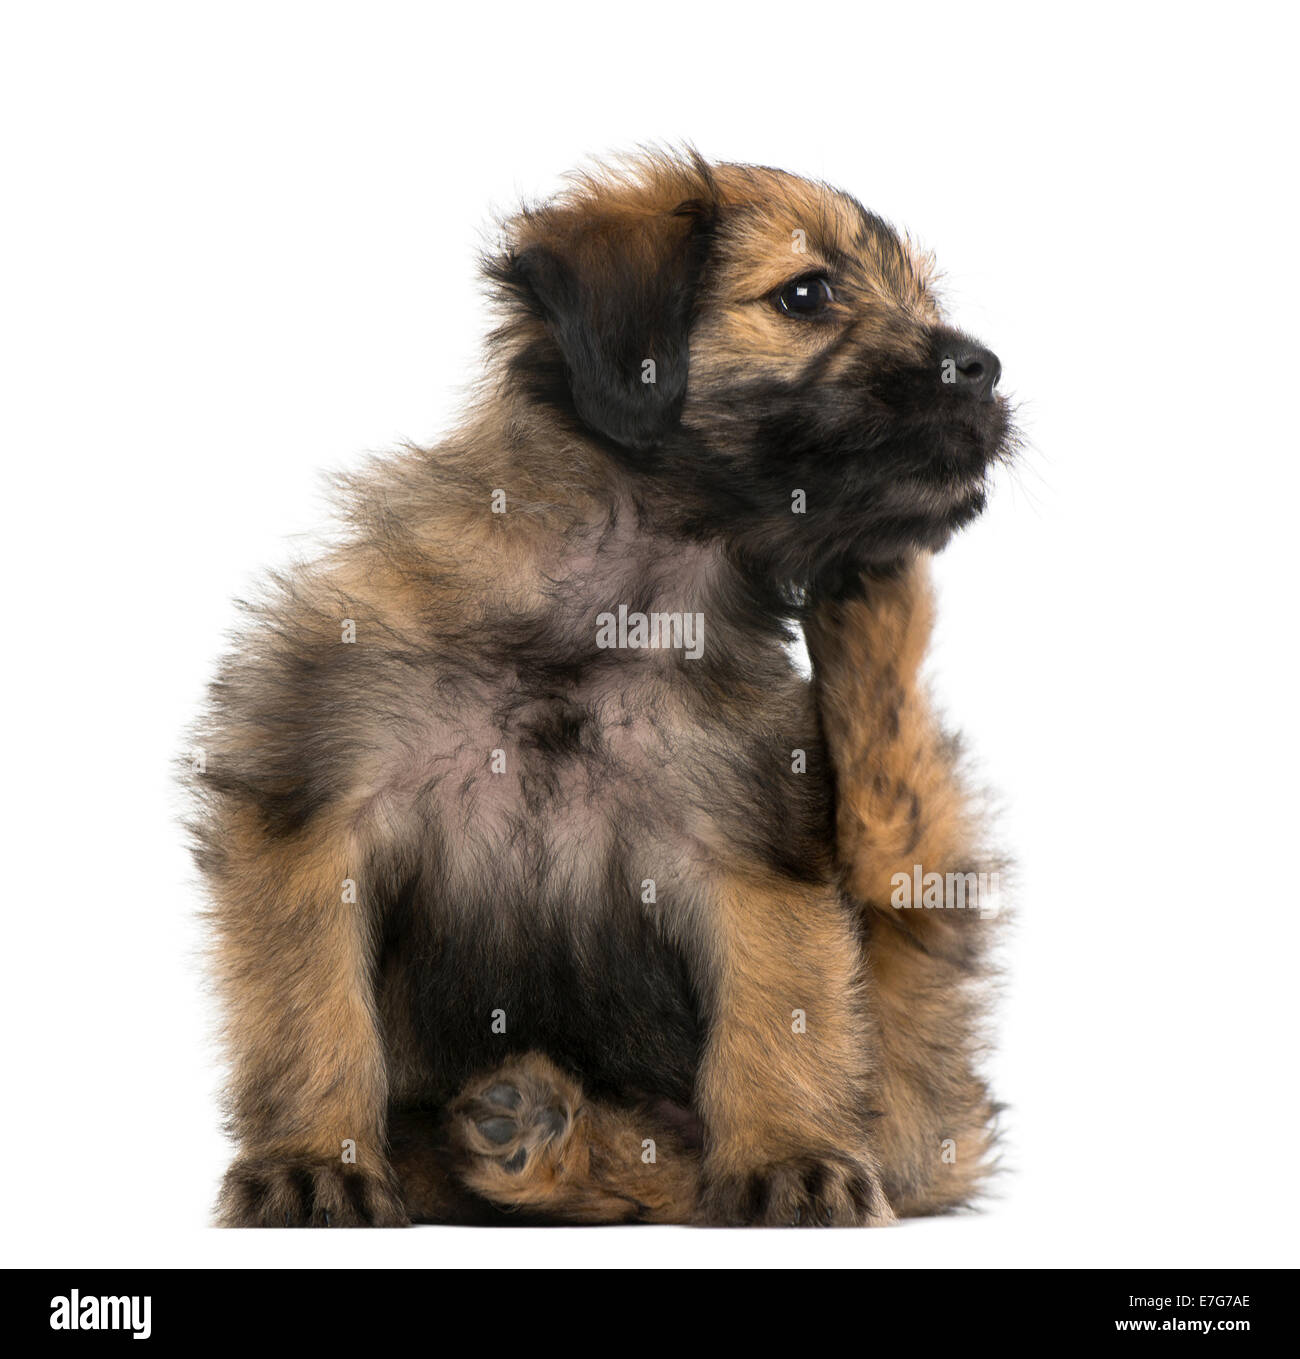 Crossbreed puppy scratching itself (2 months old) against a white background Stock Photo